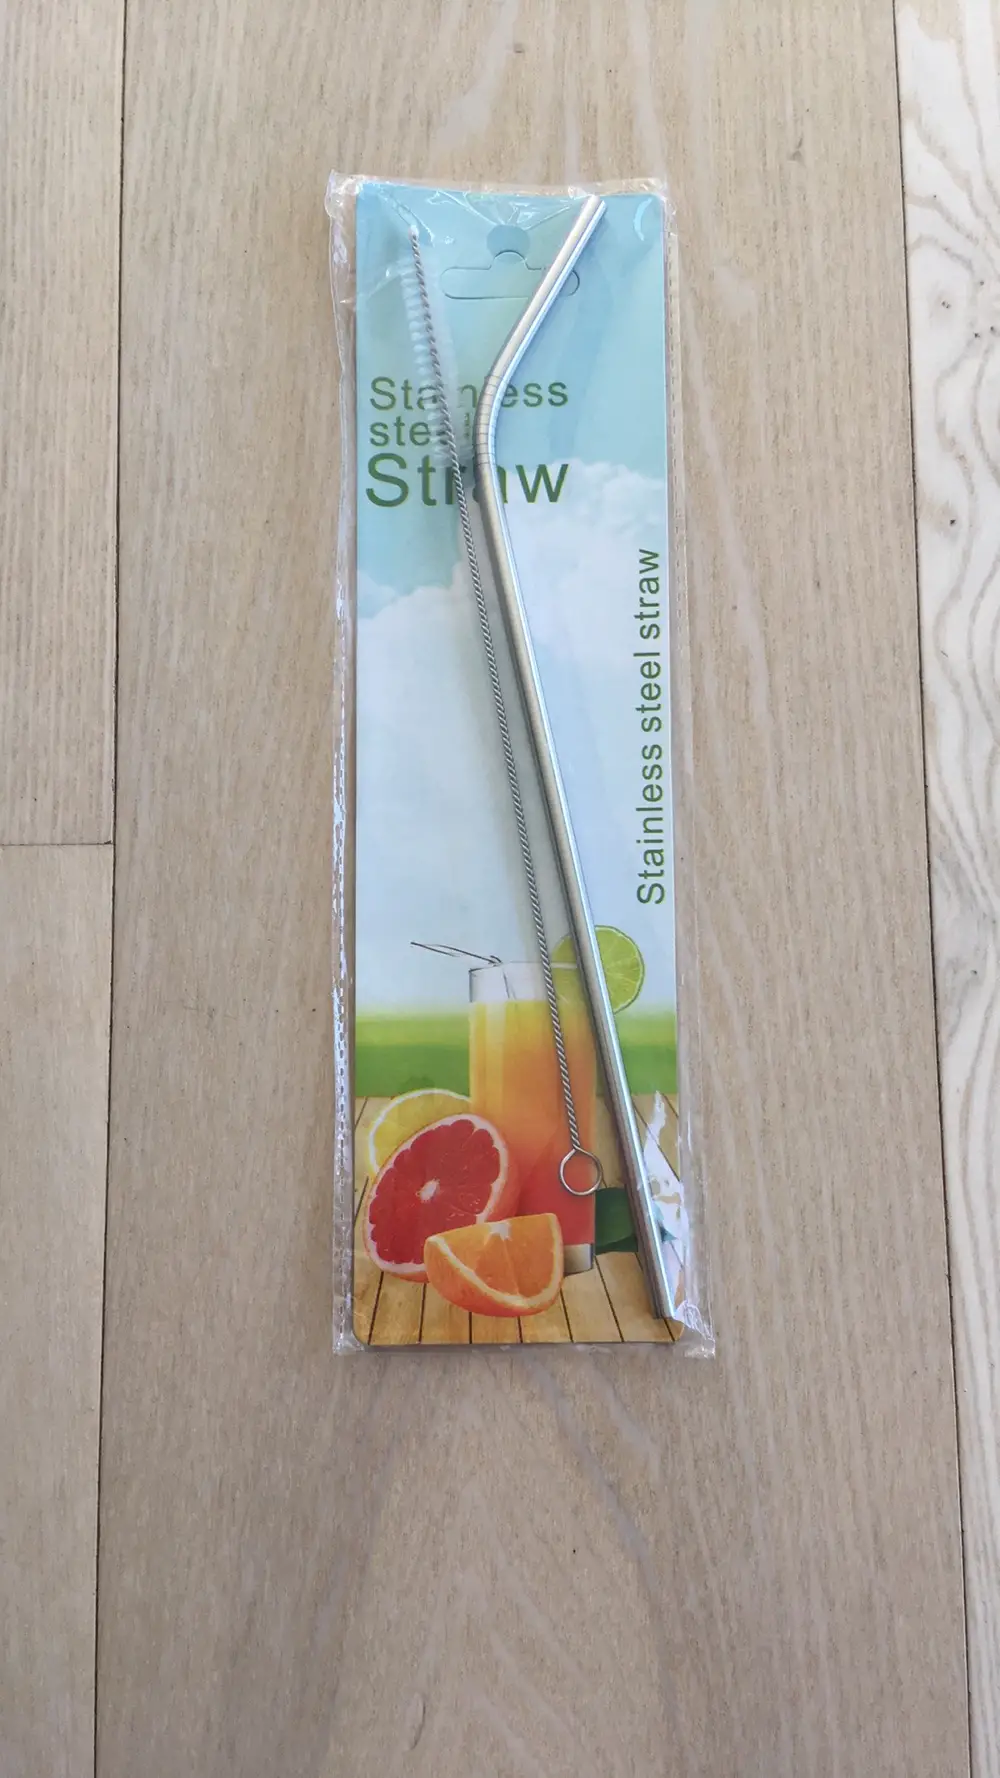 Stainless steel straw Sugerør m/knæk rustfrit stål